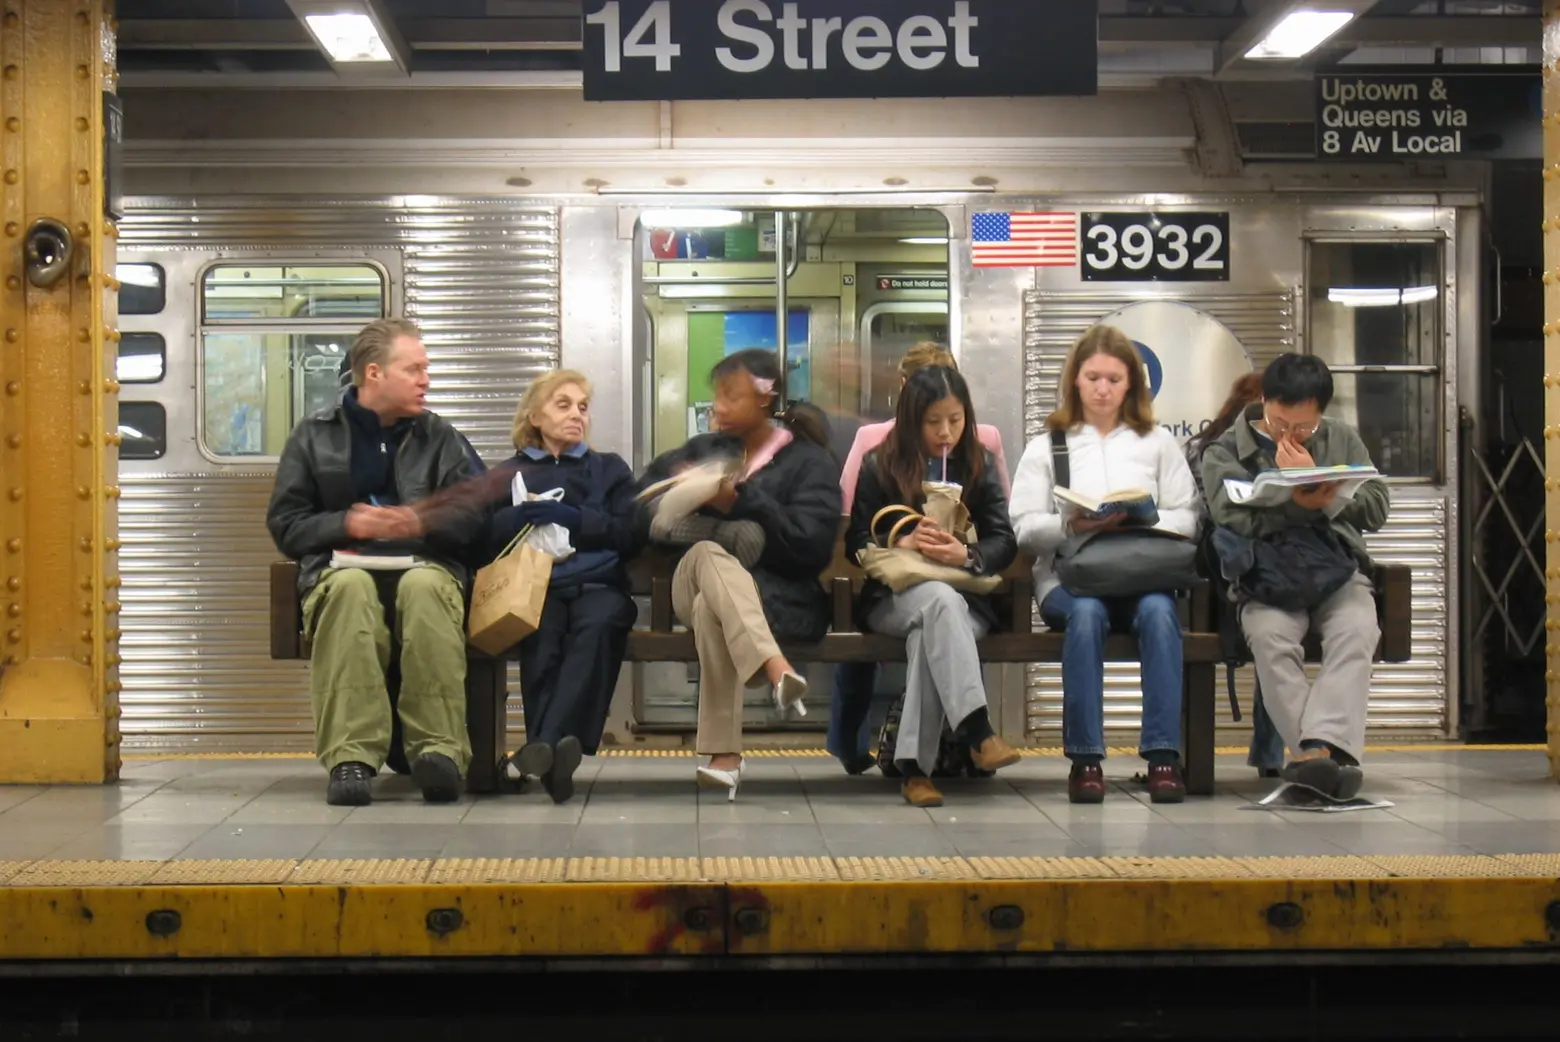 The NYC subway saw 30 million fewer trips last year